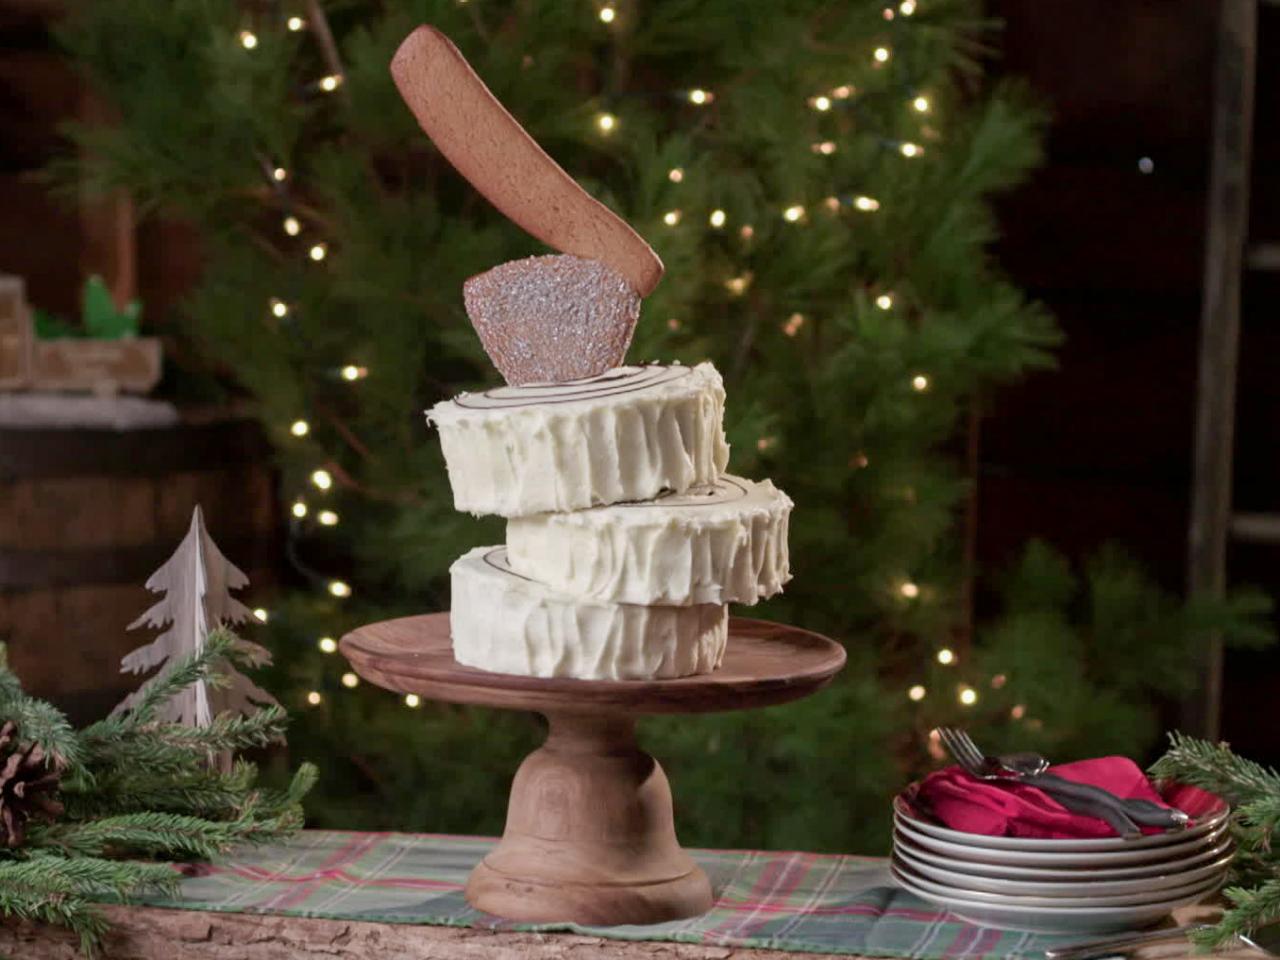 https://food.fnr.sndimg.com/content/dam/images/food/fullset/2017/11/30/1/VP0103H_Holiday-Yule-Log-with-Ax-Topper_s4x3.jpg.rend.hgtvcom.1280.960.suffix/1512094148470.jpeg